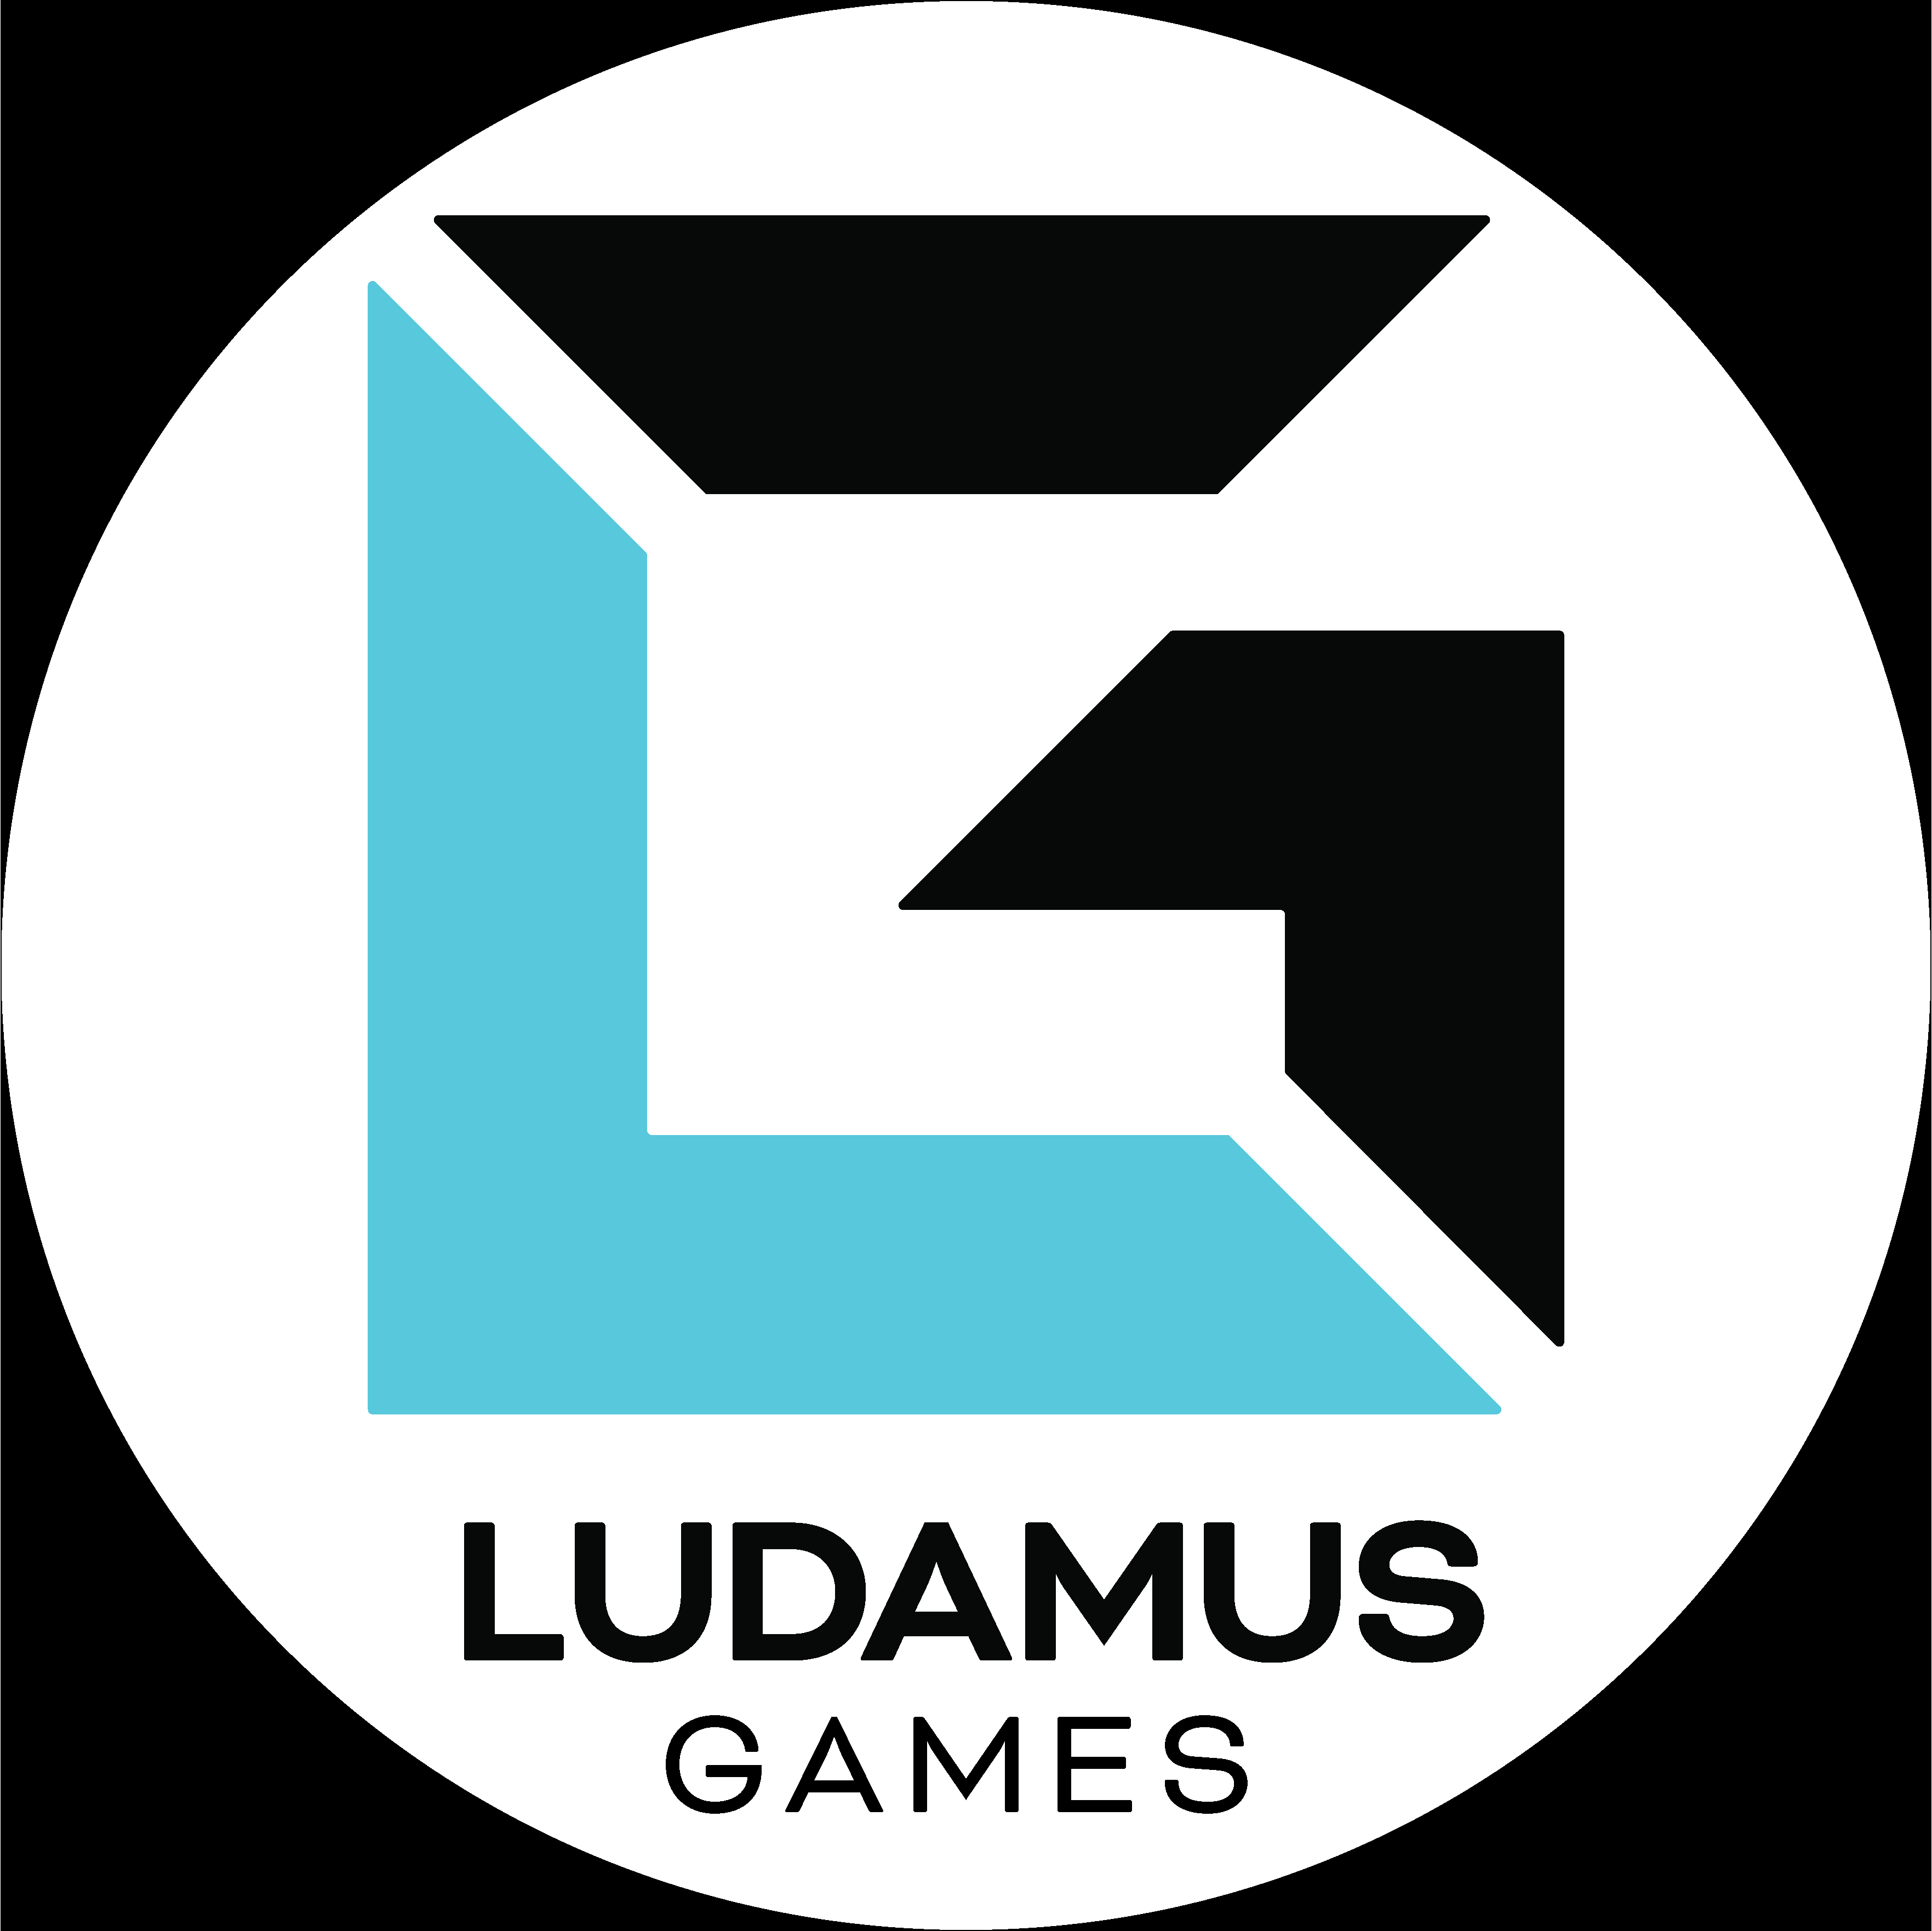 We are a board game publishing company, with a goal of sharing our love of games with everyone. Ludamus means 'Let's Play' in Latin.